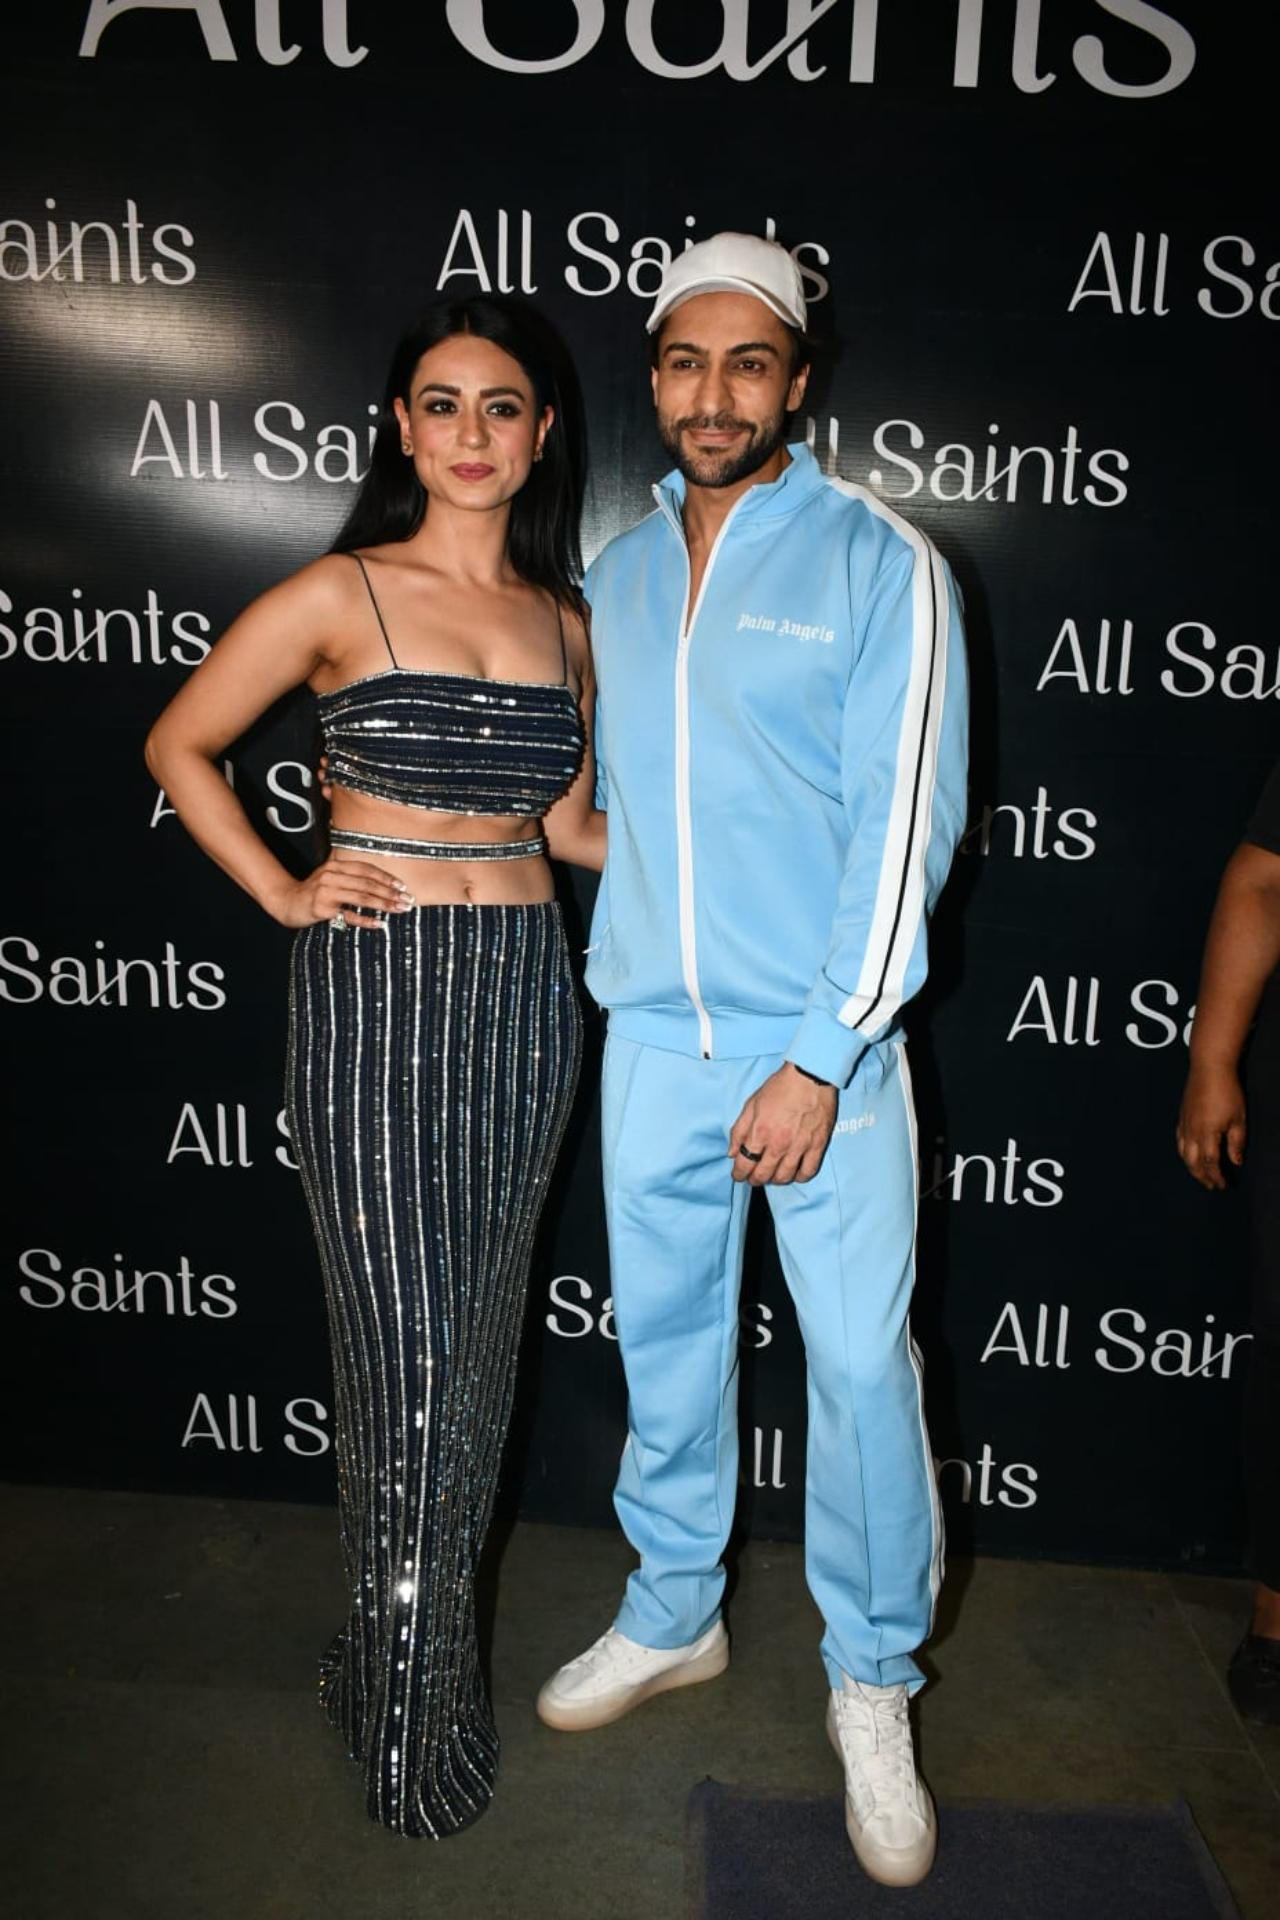 Shalin Bhanot, who was in the top 5 was seen in athleisure wear. He posed along with the gorgeous Soundarya Sharma before heading into the party. Soundarya looked stunning in a black-striped outfit with a bralette top